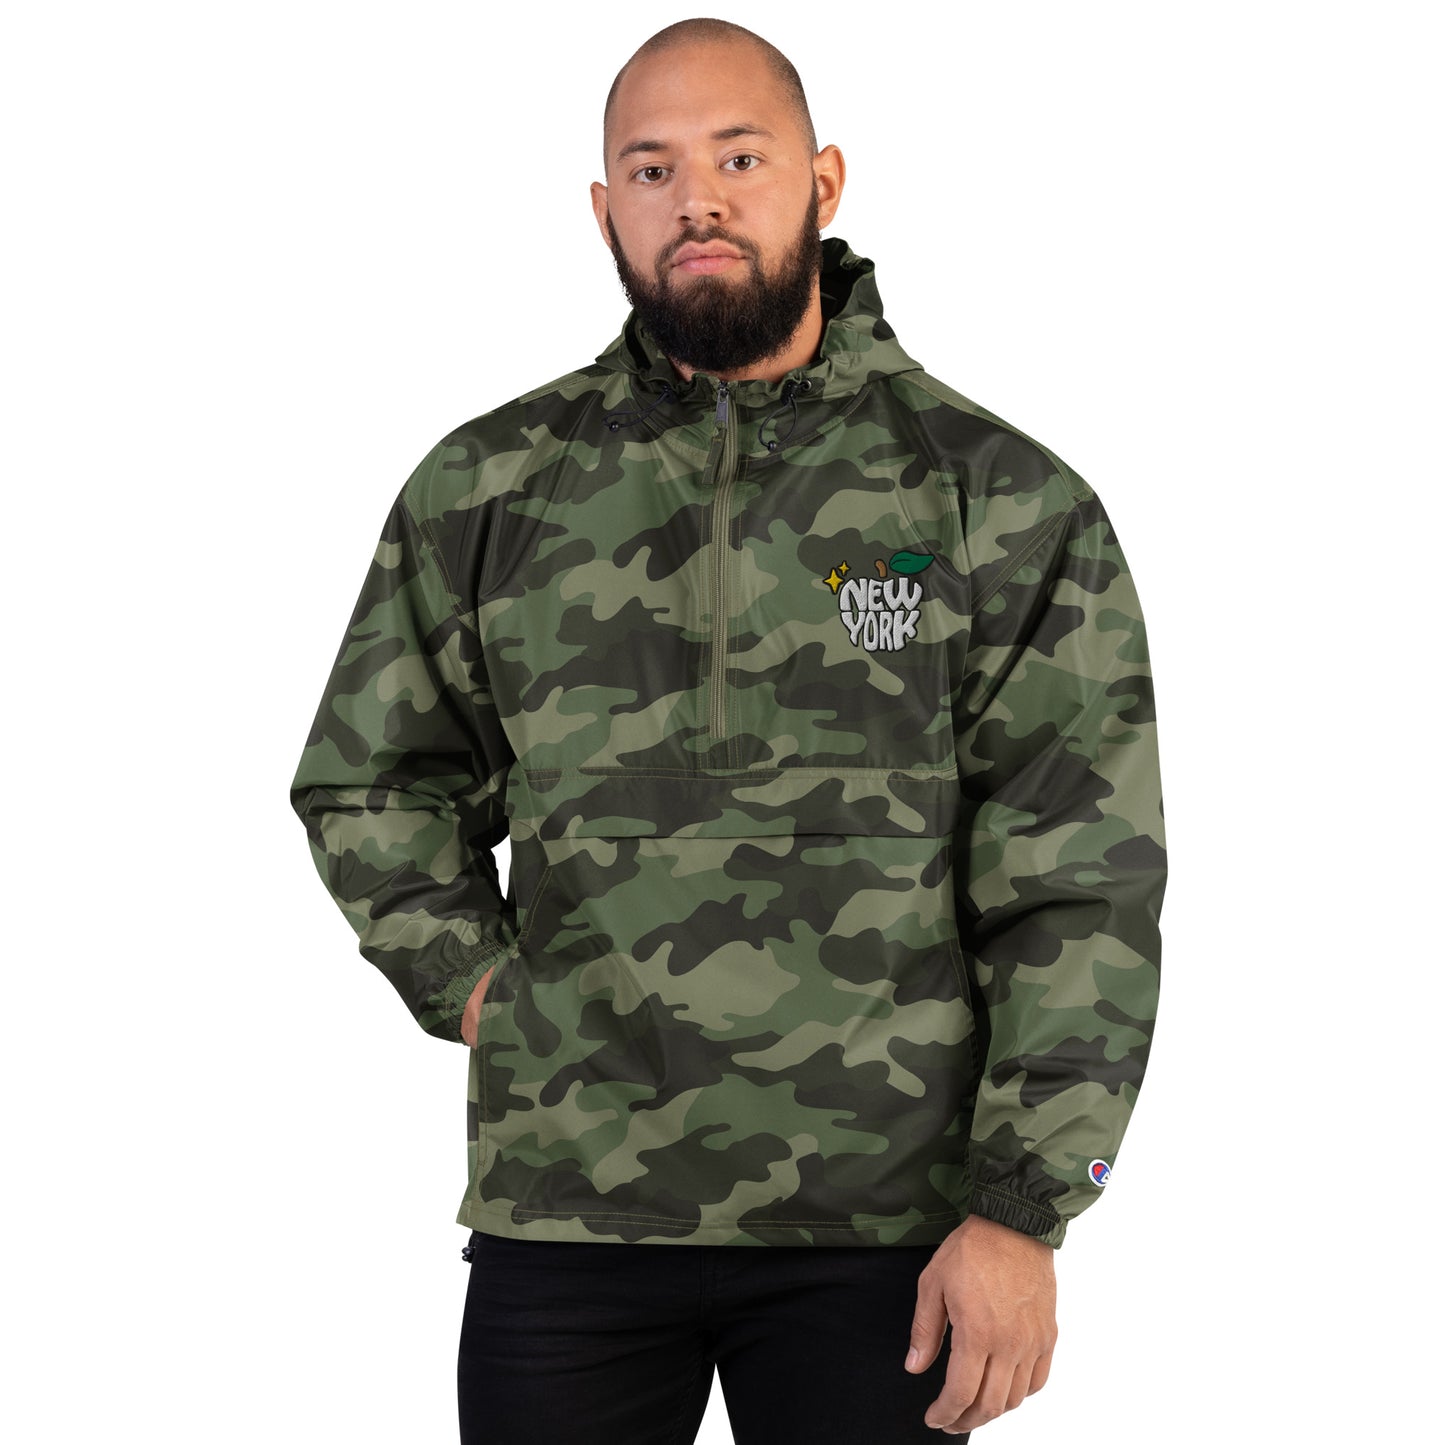 New York Apple Logo Embroidered Camo Champion Packable Windbreaker Jacket Scattered Streetwear